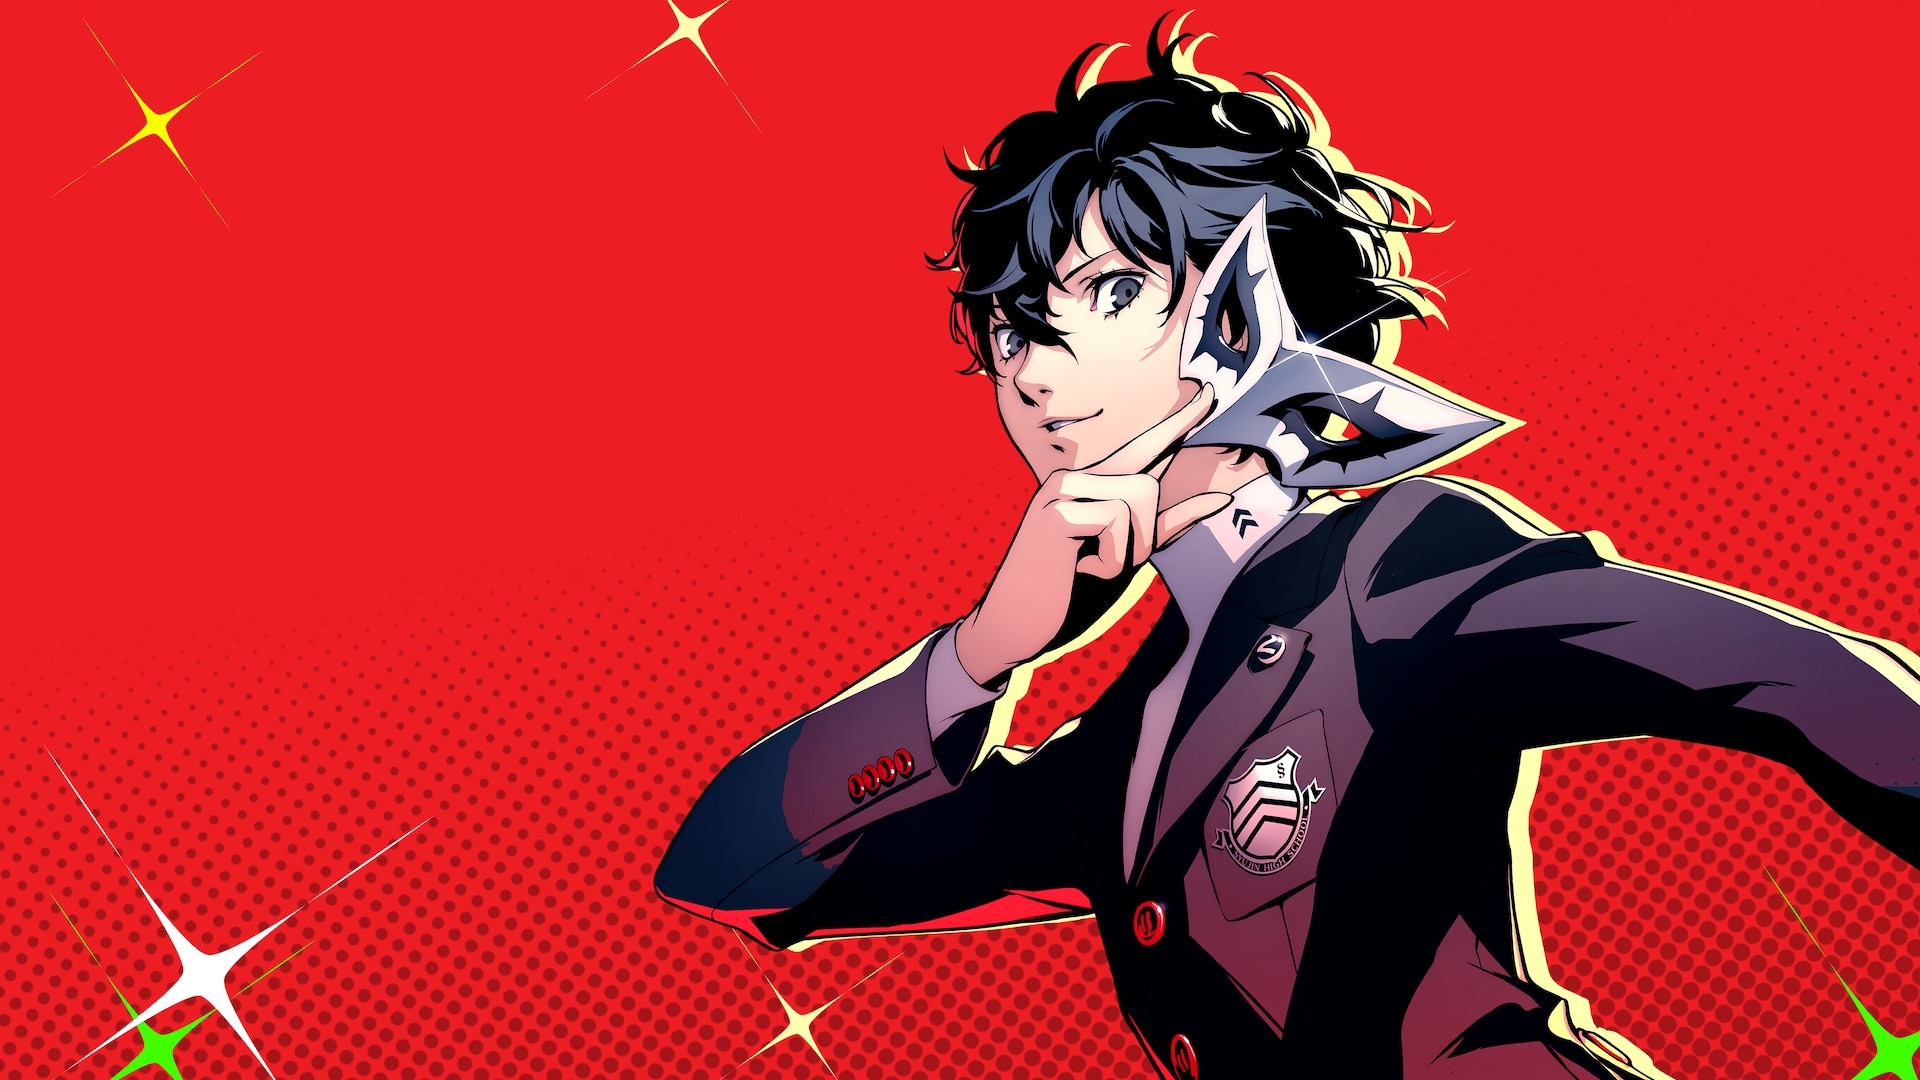 Persona 5 Royal Game Wallpaper, HD Games 4K Wallpapers, Images and ...